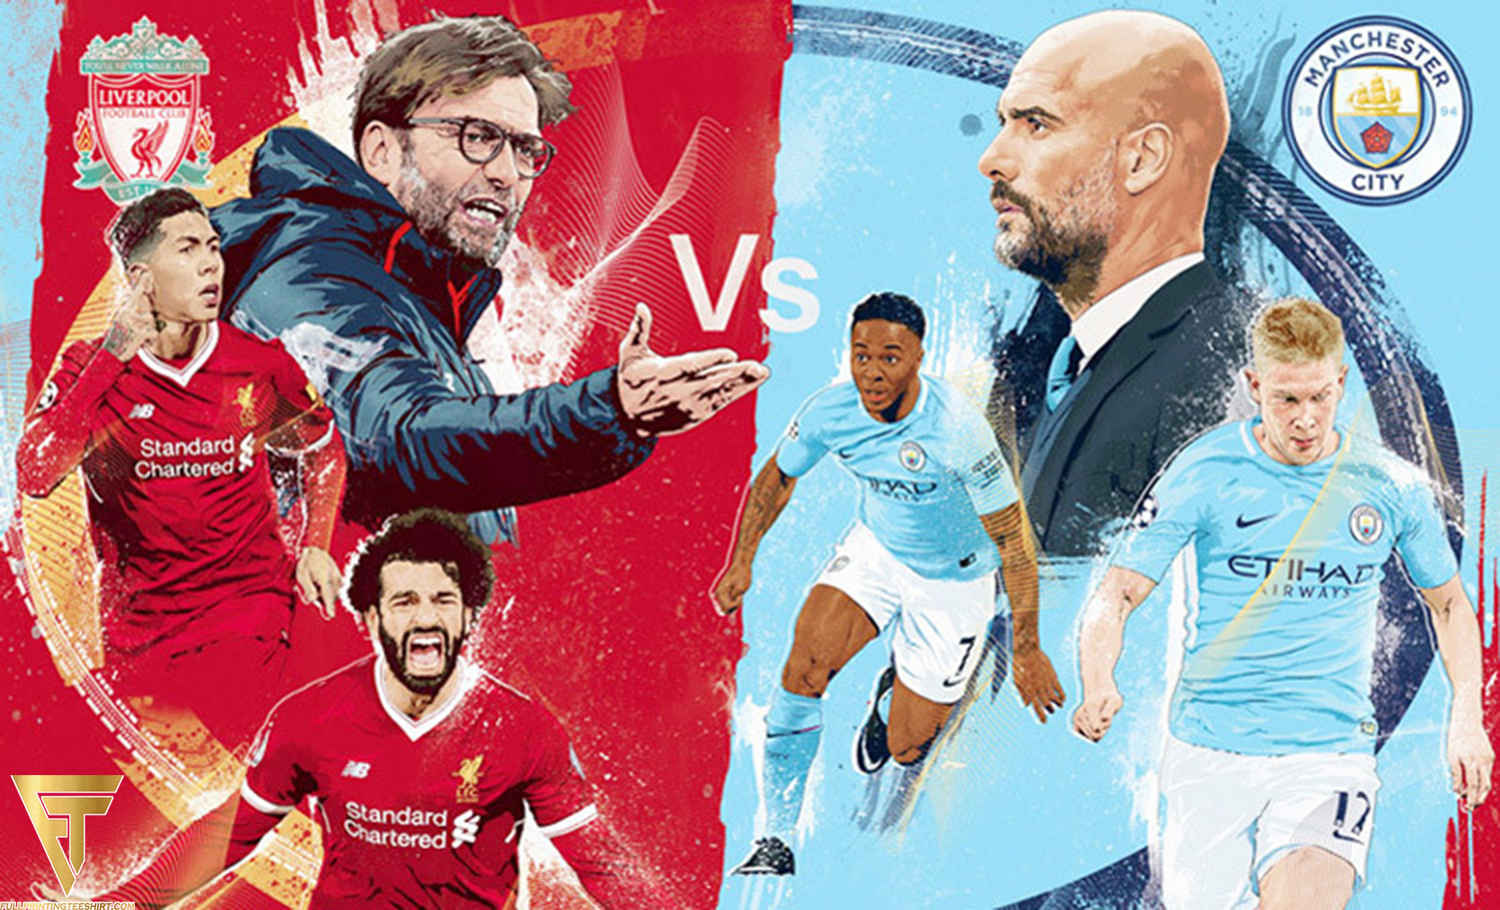 Anfield's Epic The Summit of Football Rivalry - Liverpool vs Manchester City